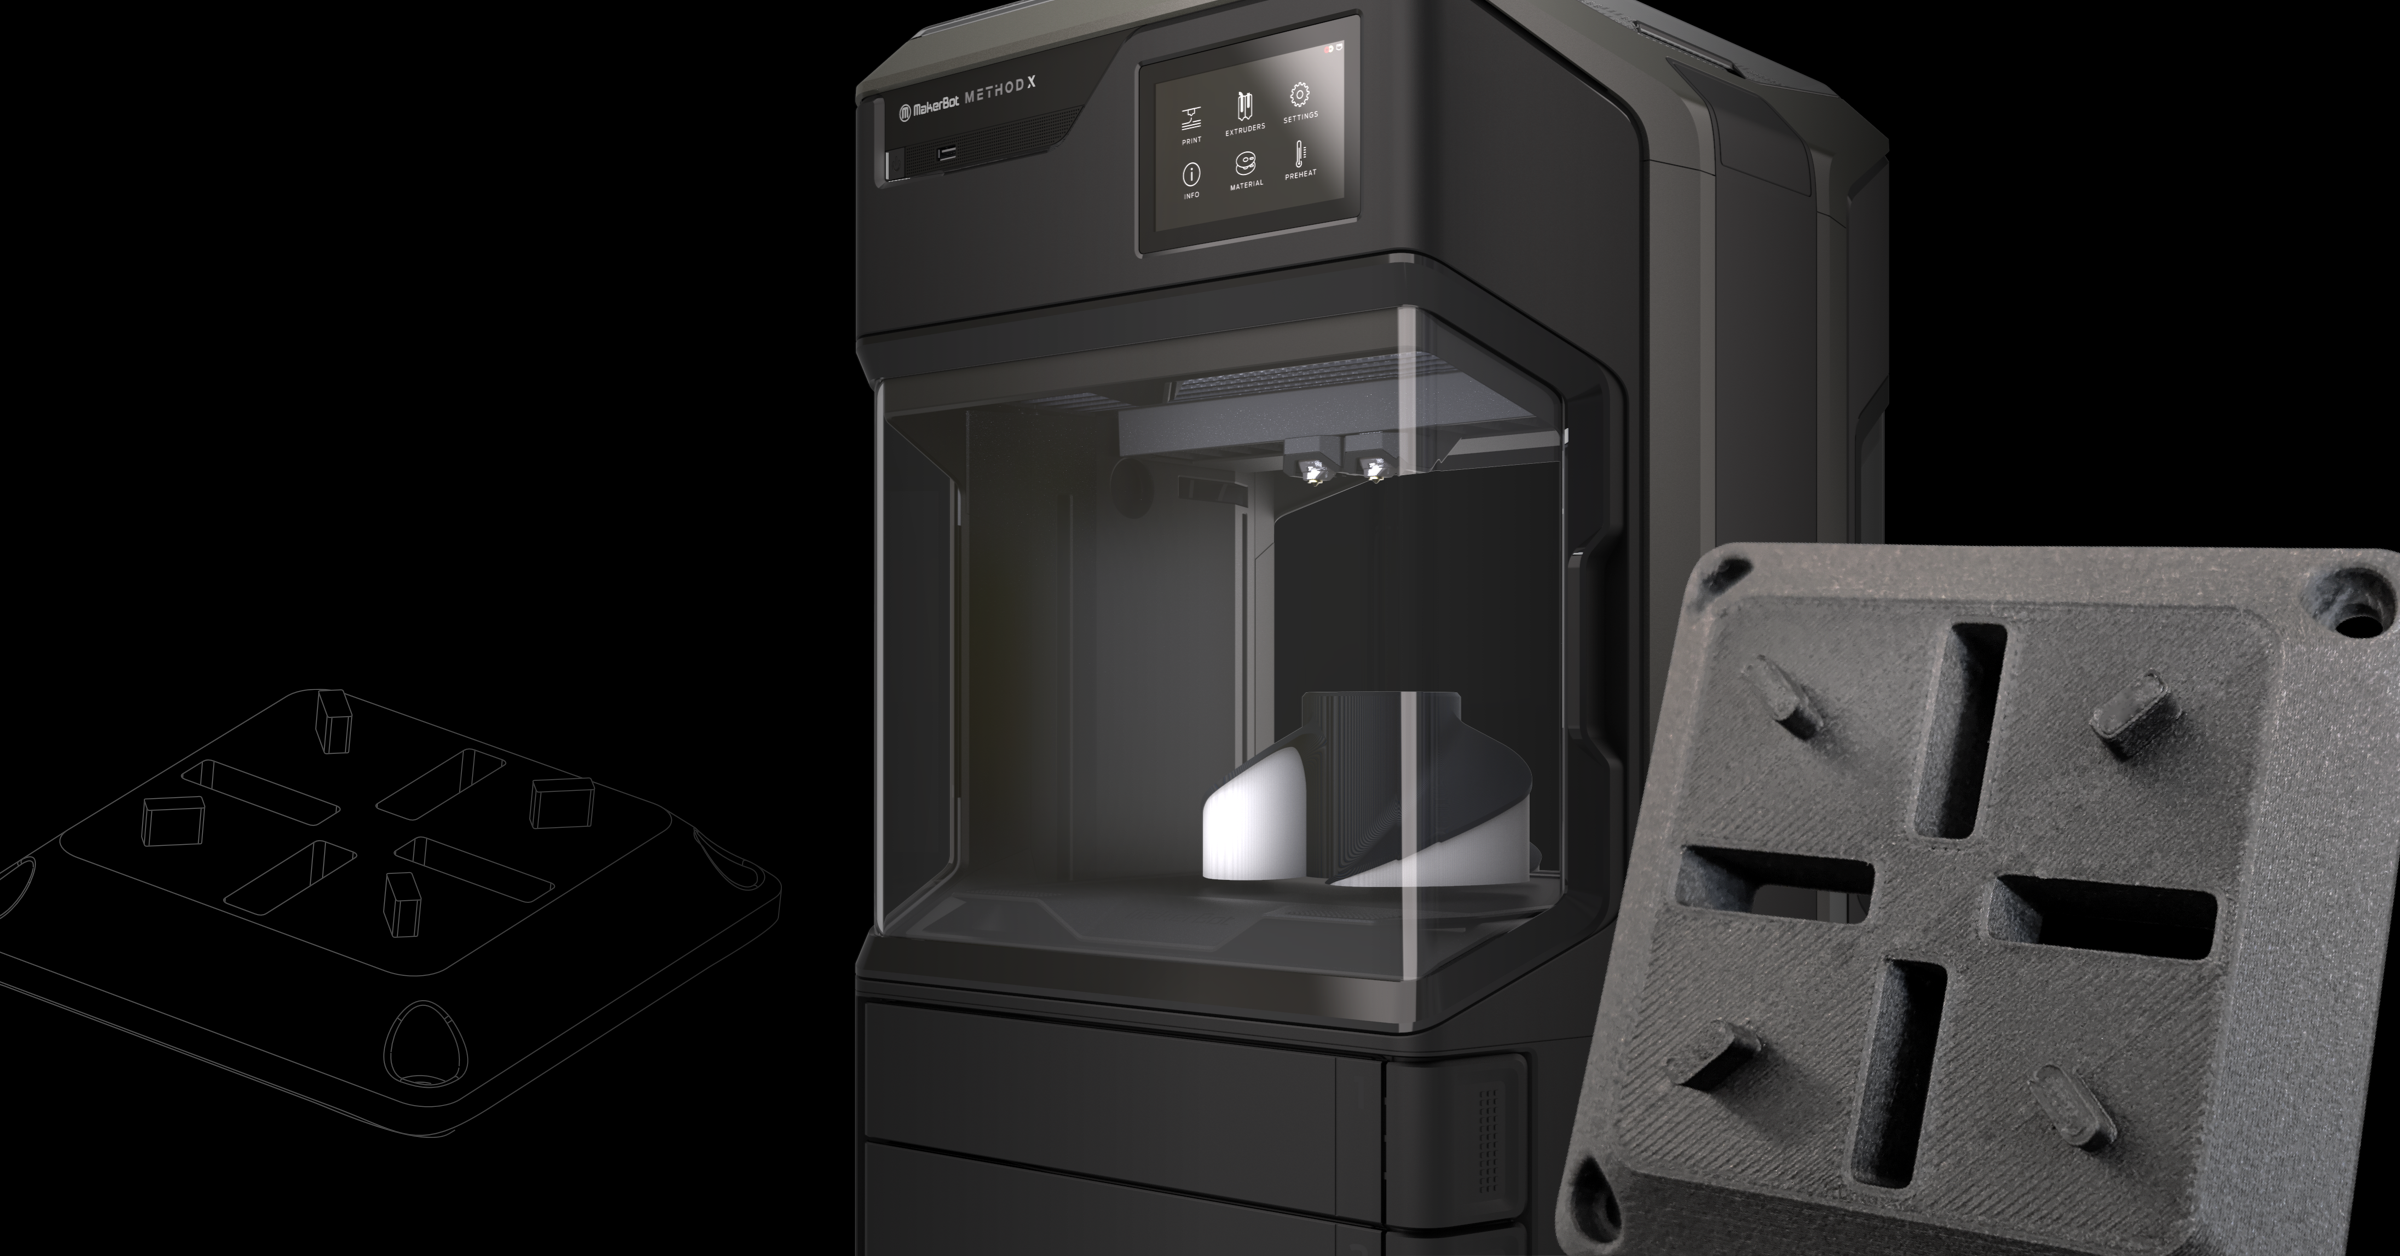 MakerBot® Method X Carbon Fiber Edition (lead time may apply)